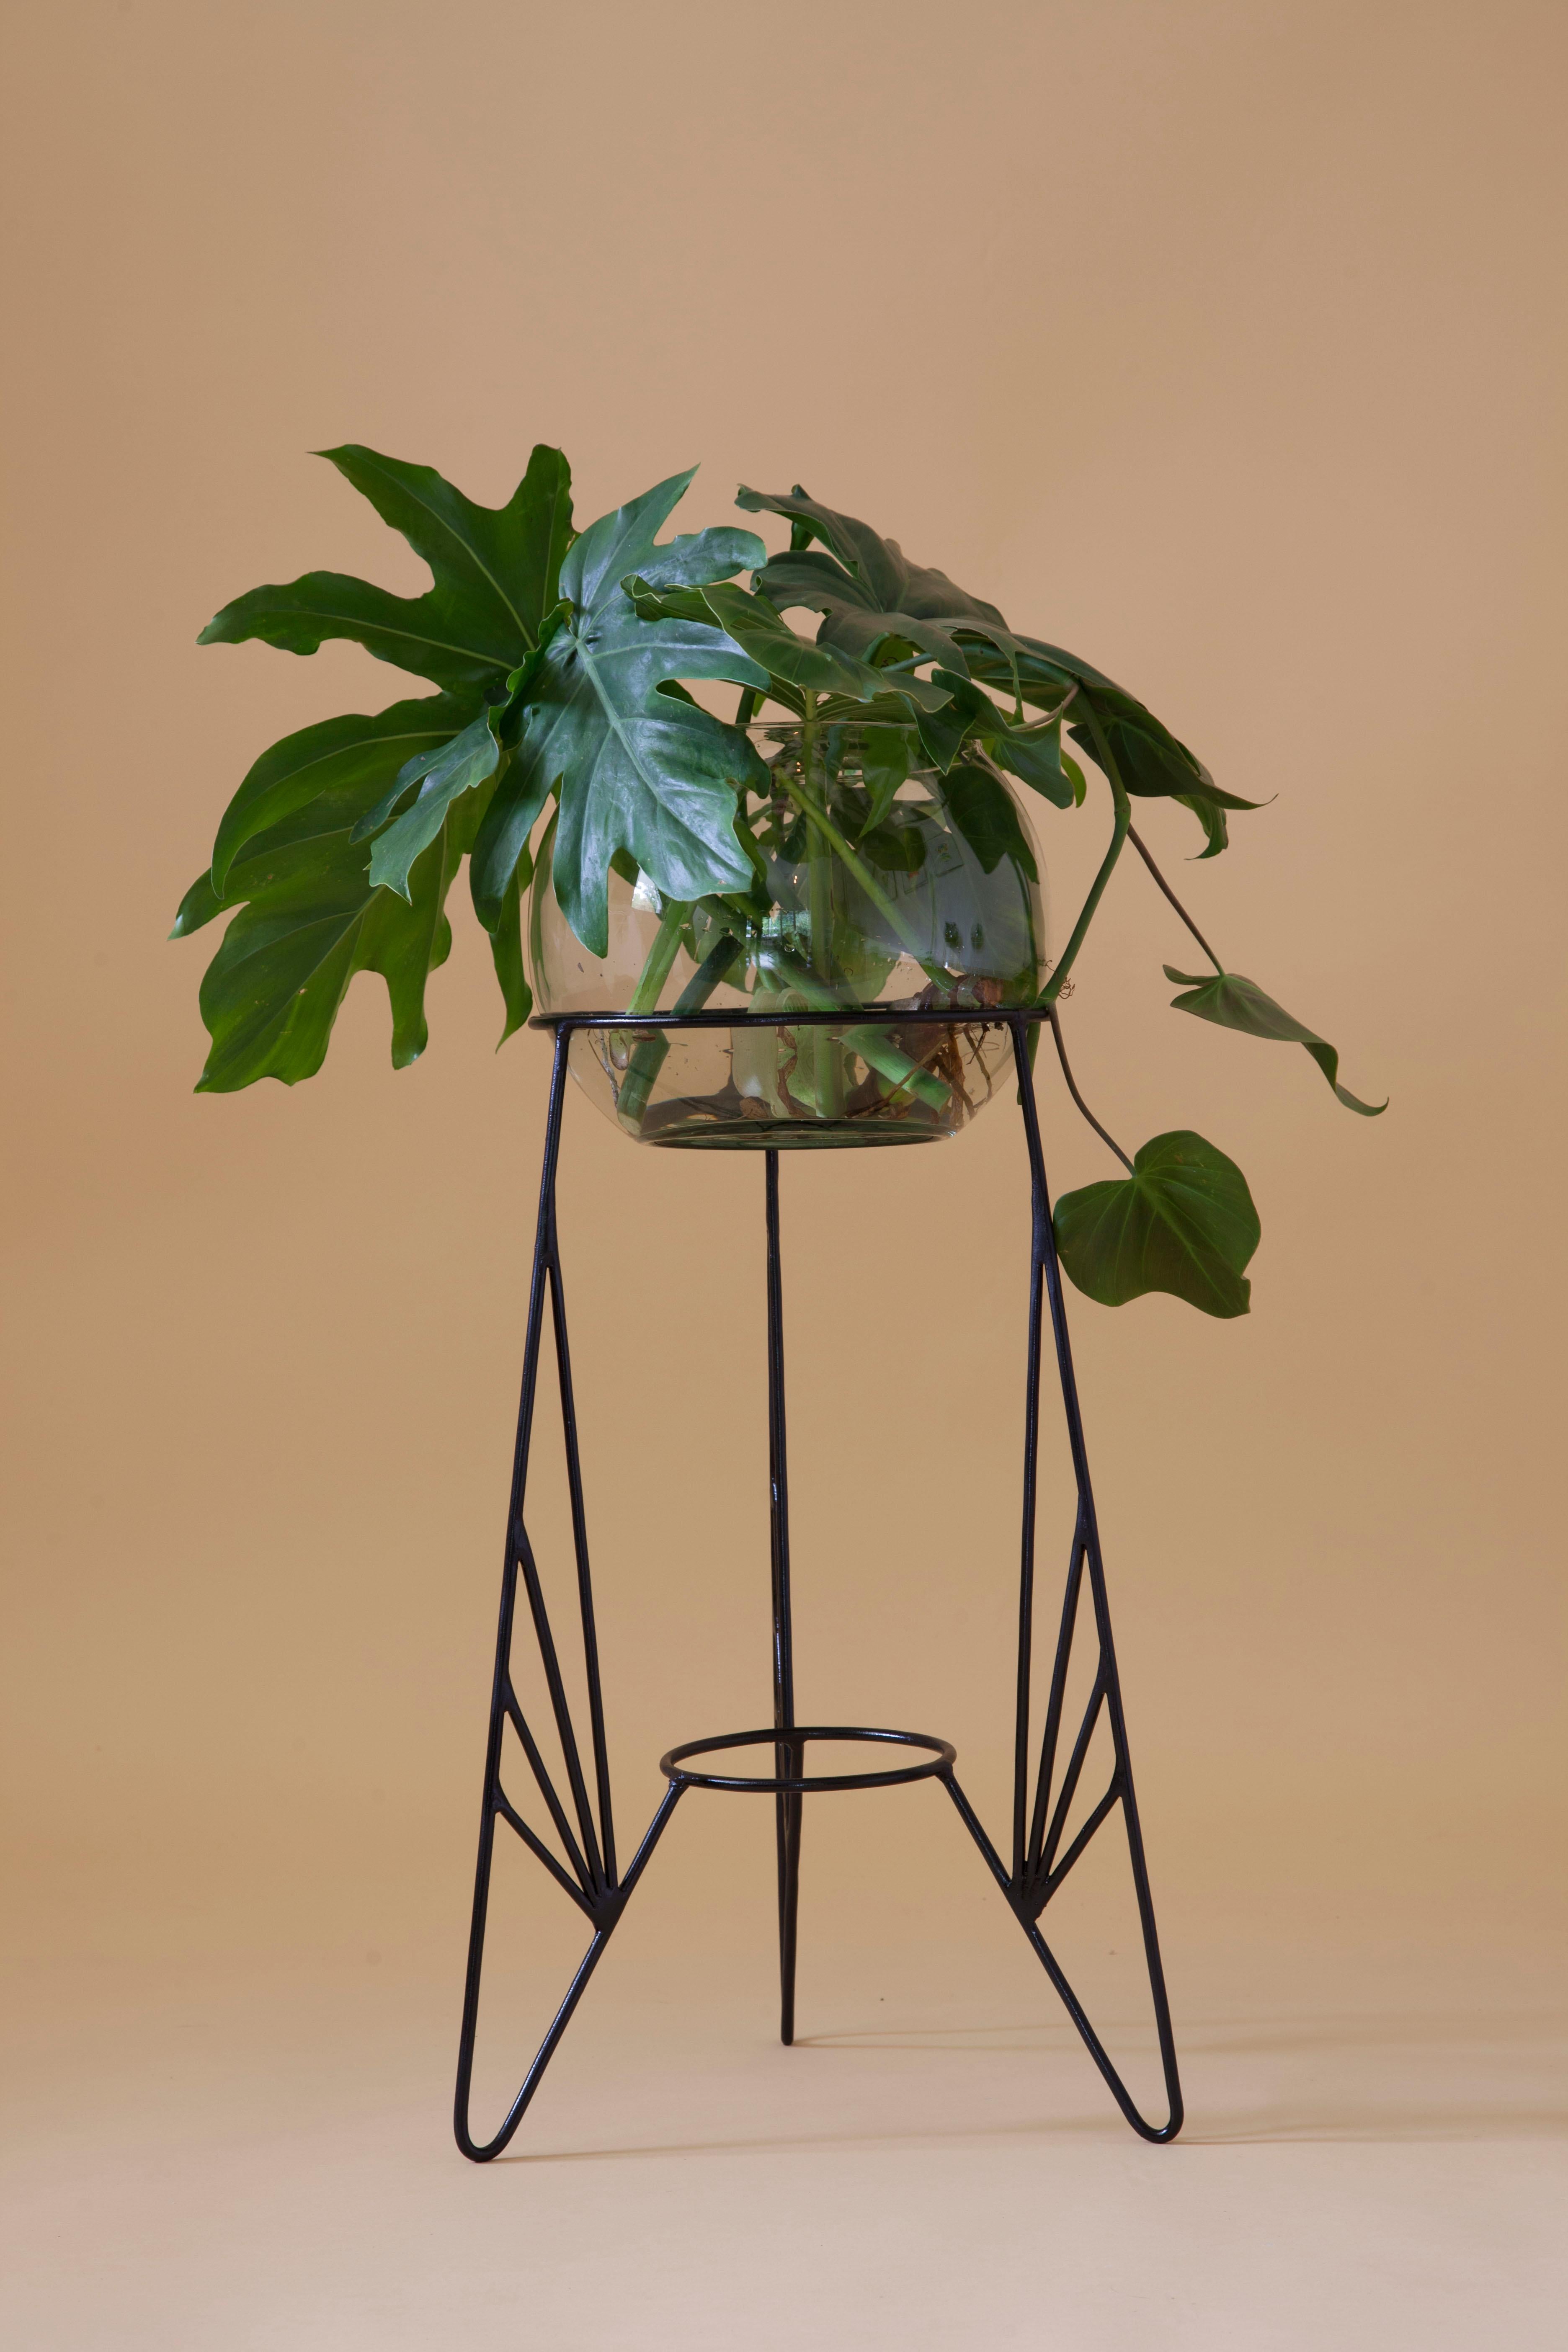 Aurea plant stand 5 by Sofia Alvarado
Limited edition 1 of 10 (one in stock)
Materials: metal & woods / golden, white or black. 
 include glass ball jar
Dimensions: H 70 x W 30 cm

FI is an ornamental artist who embodies the creative